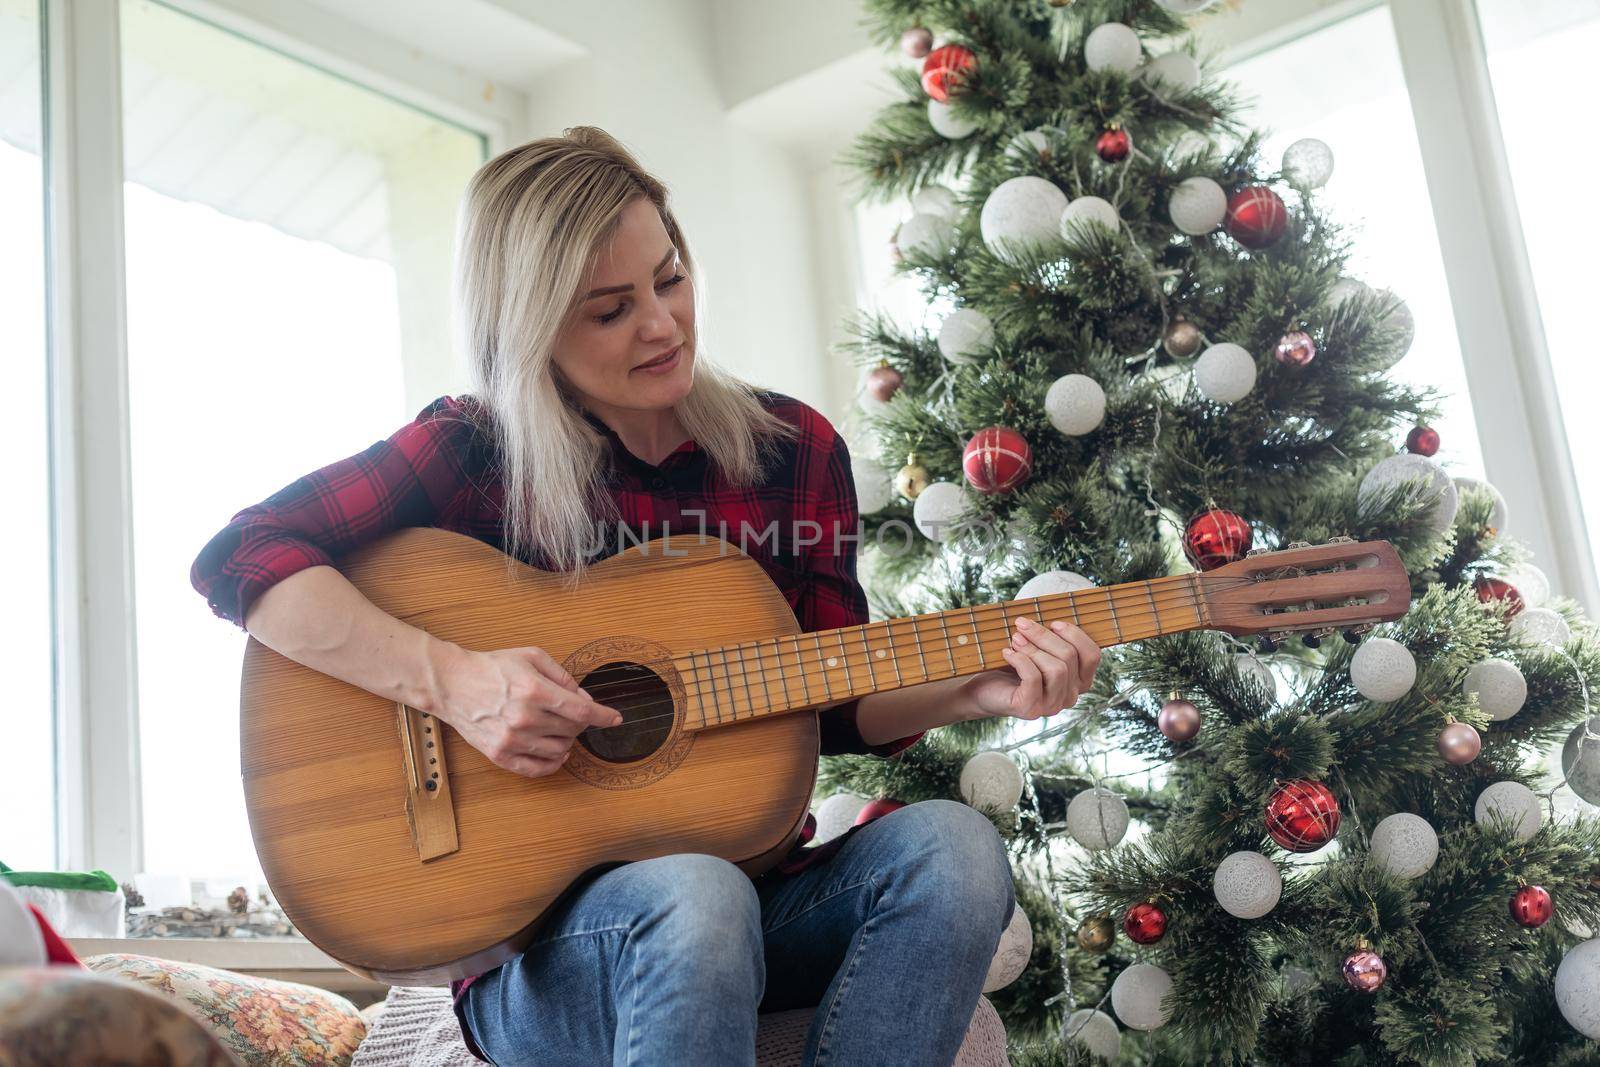 beautiful dark sits near the Christmas tree decorated with balls and light and playing the guitar and singing. Young beautiful smiling woman play guitar